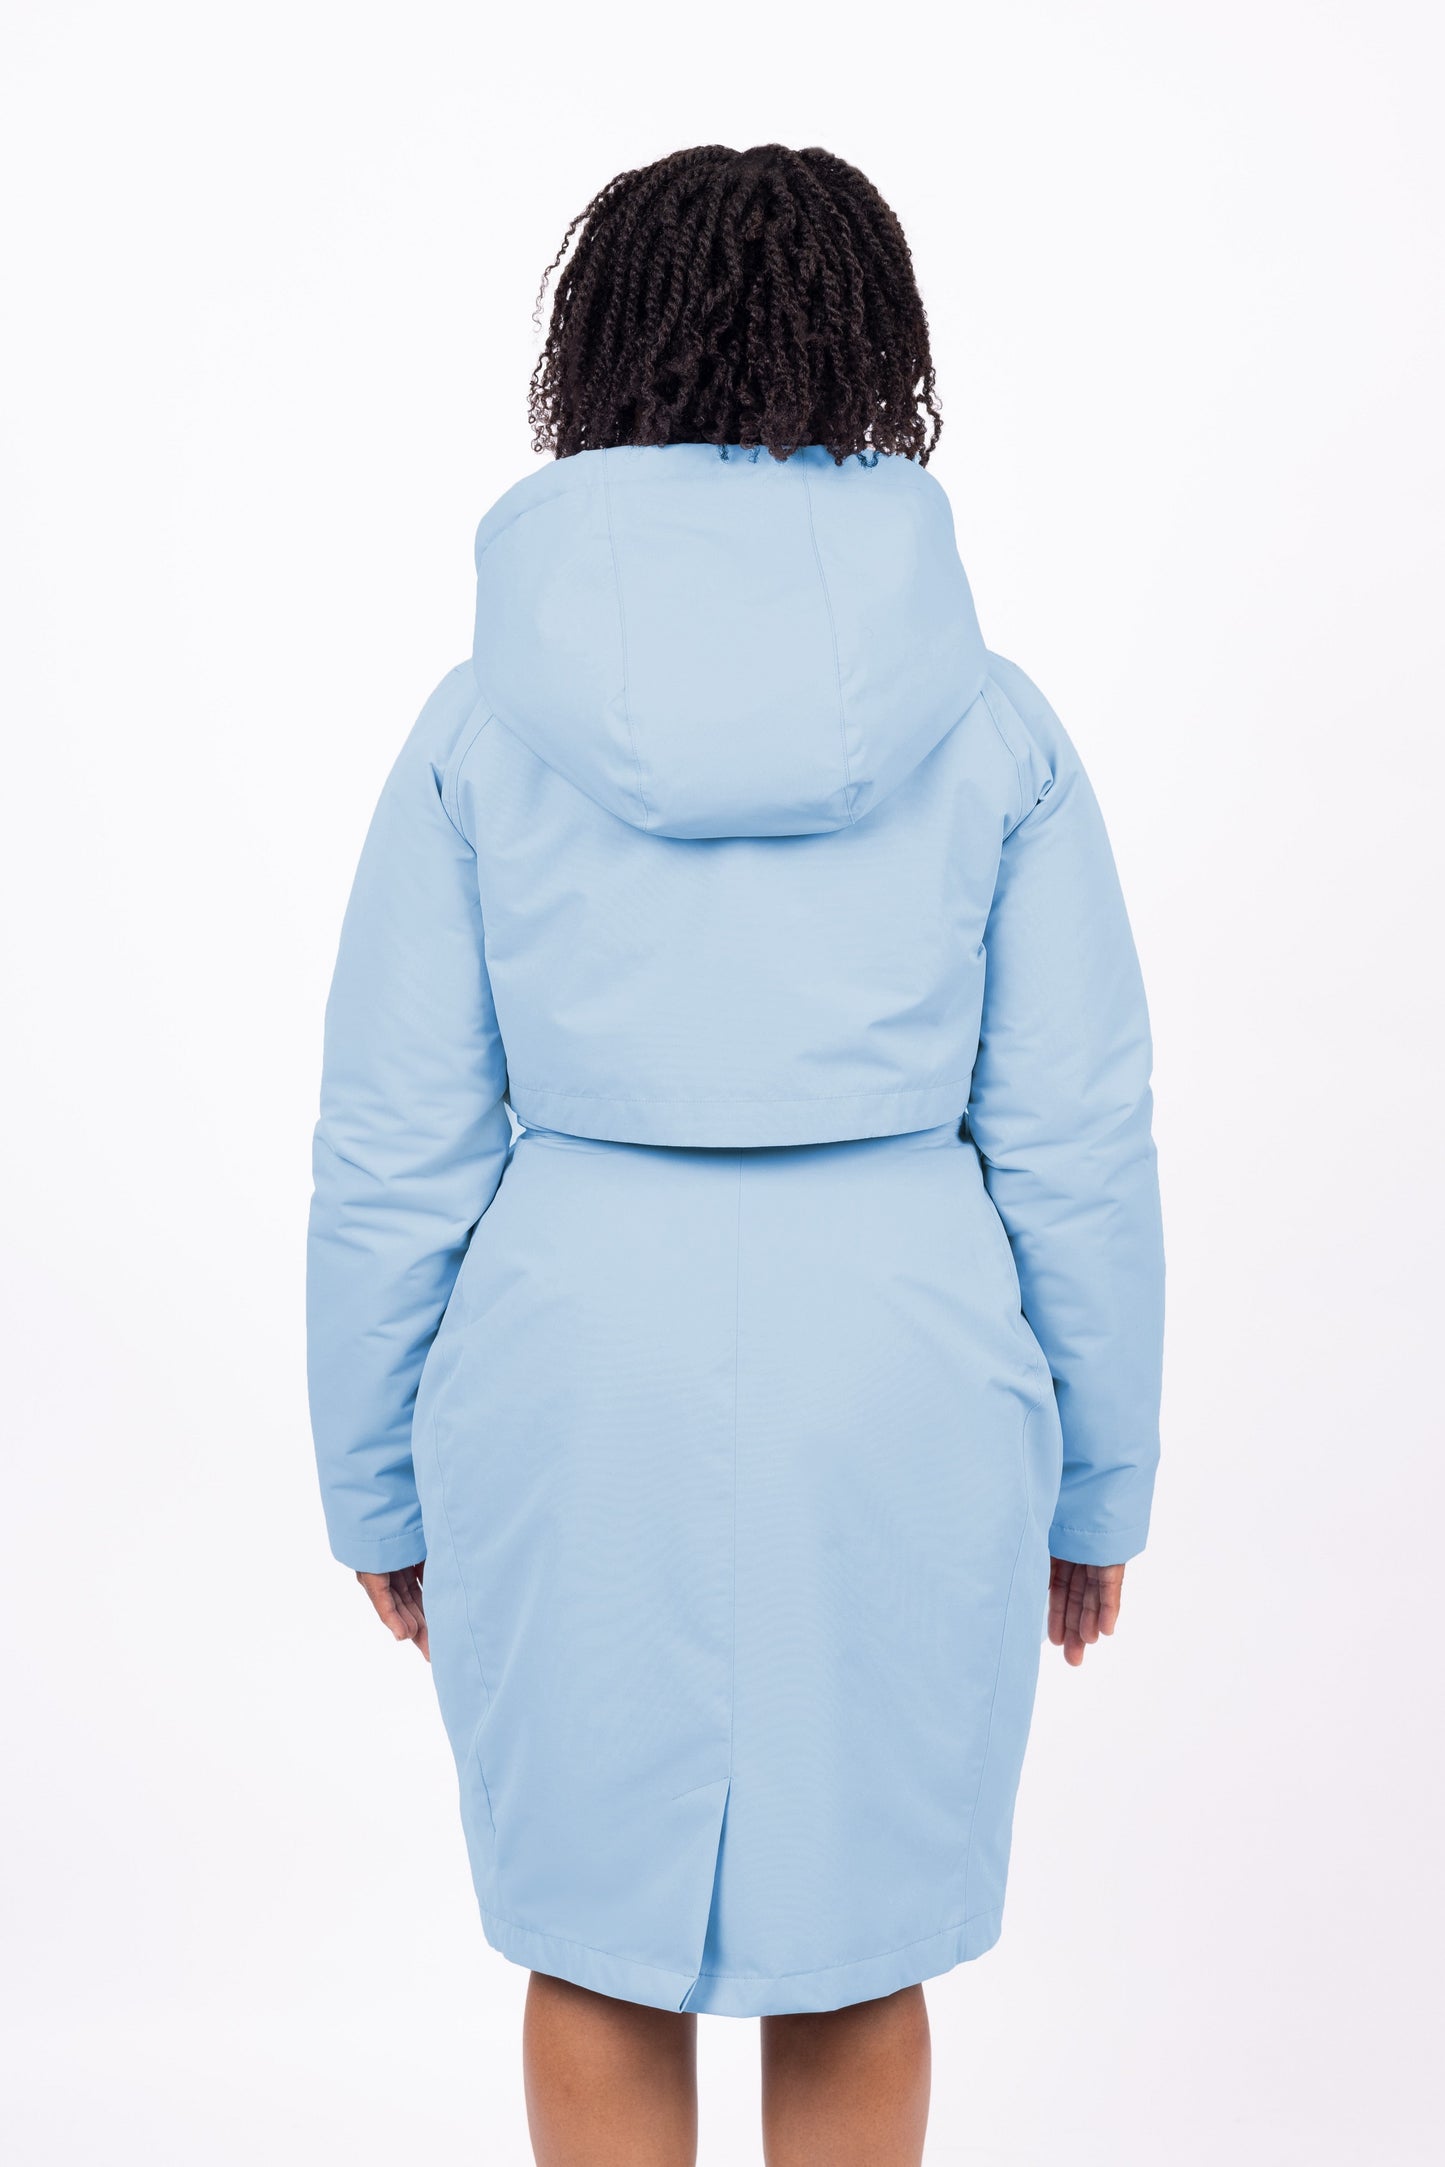 light blue coat womens made from recycled bottles